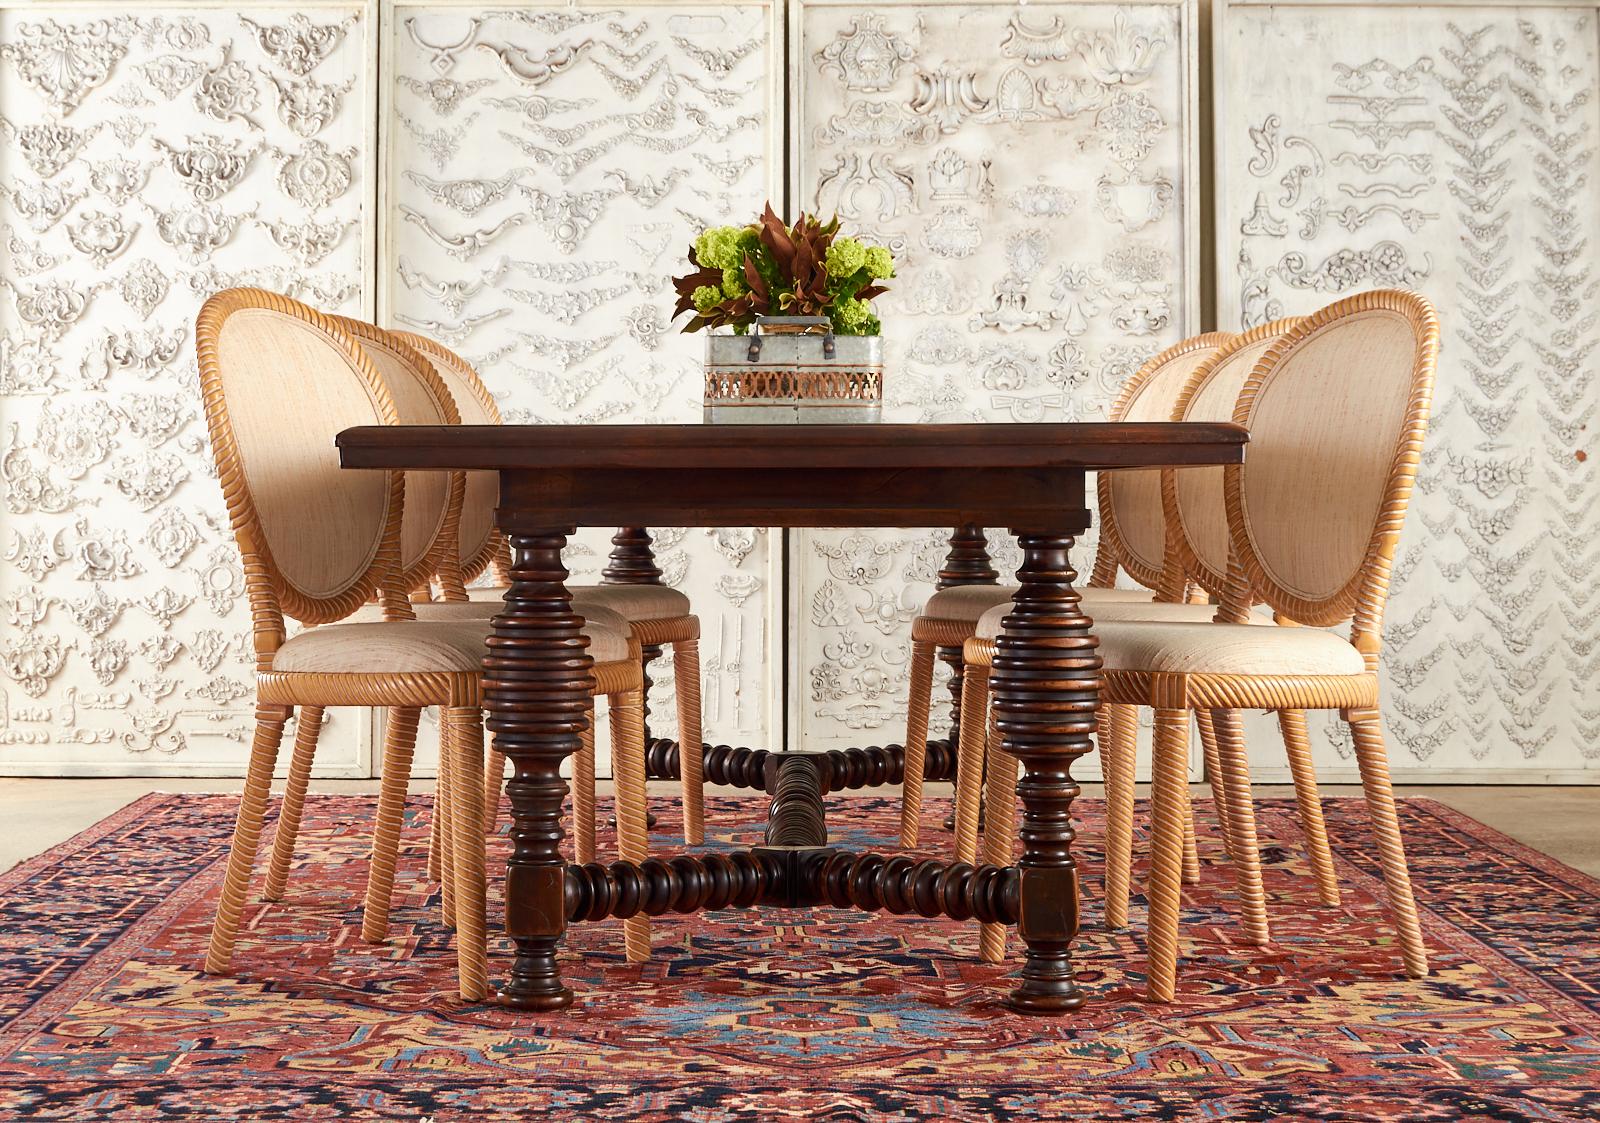 Magnificent Portuguese baroque style farmhouse dining table hand-crafted in Italy. The large rustic table features a thick rectangular top having three geometric parquetry inlay patterns. Supported by substantial turned spool legs ending with disc